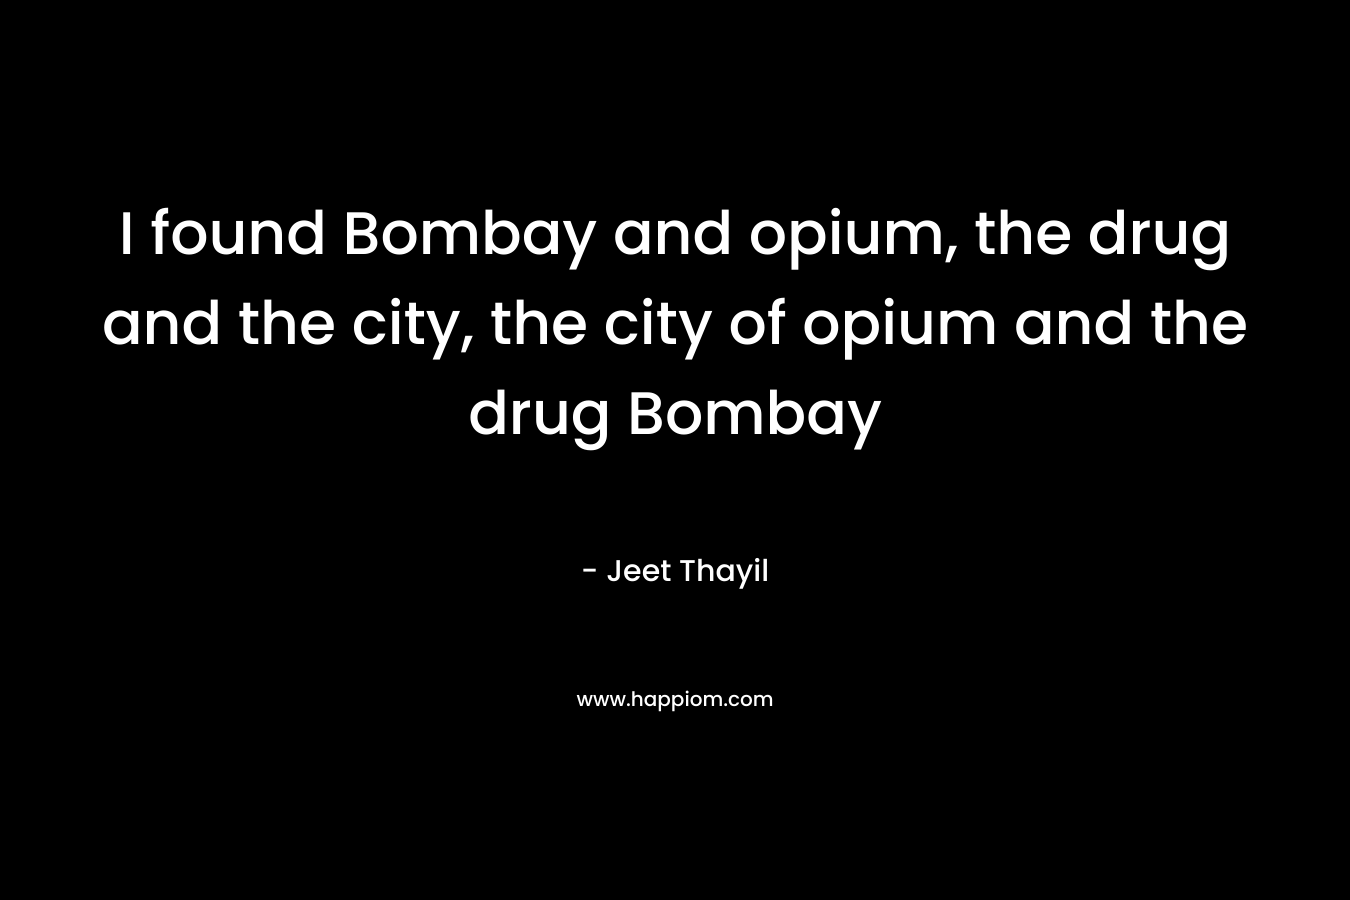 I found Bombay and opium, the drug and the city, the city of opium and the drug Bombay